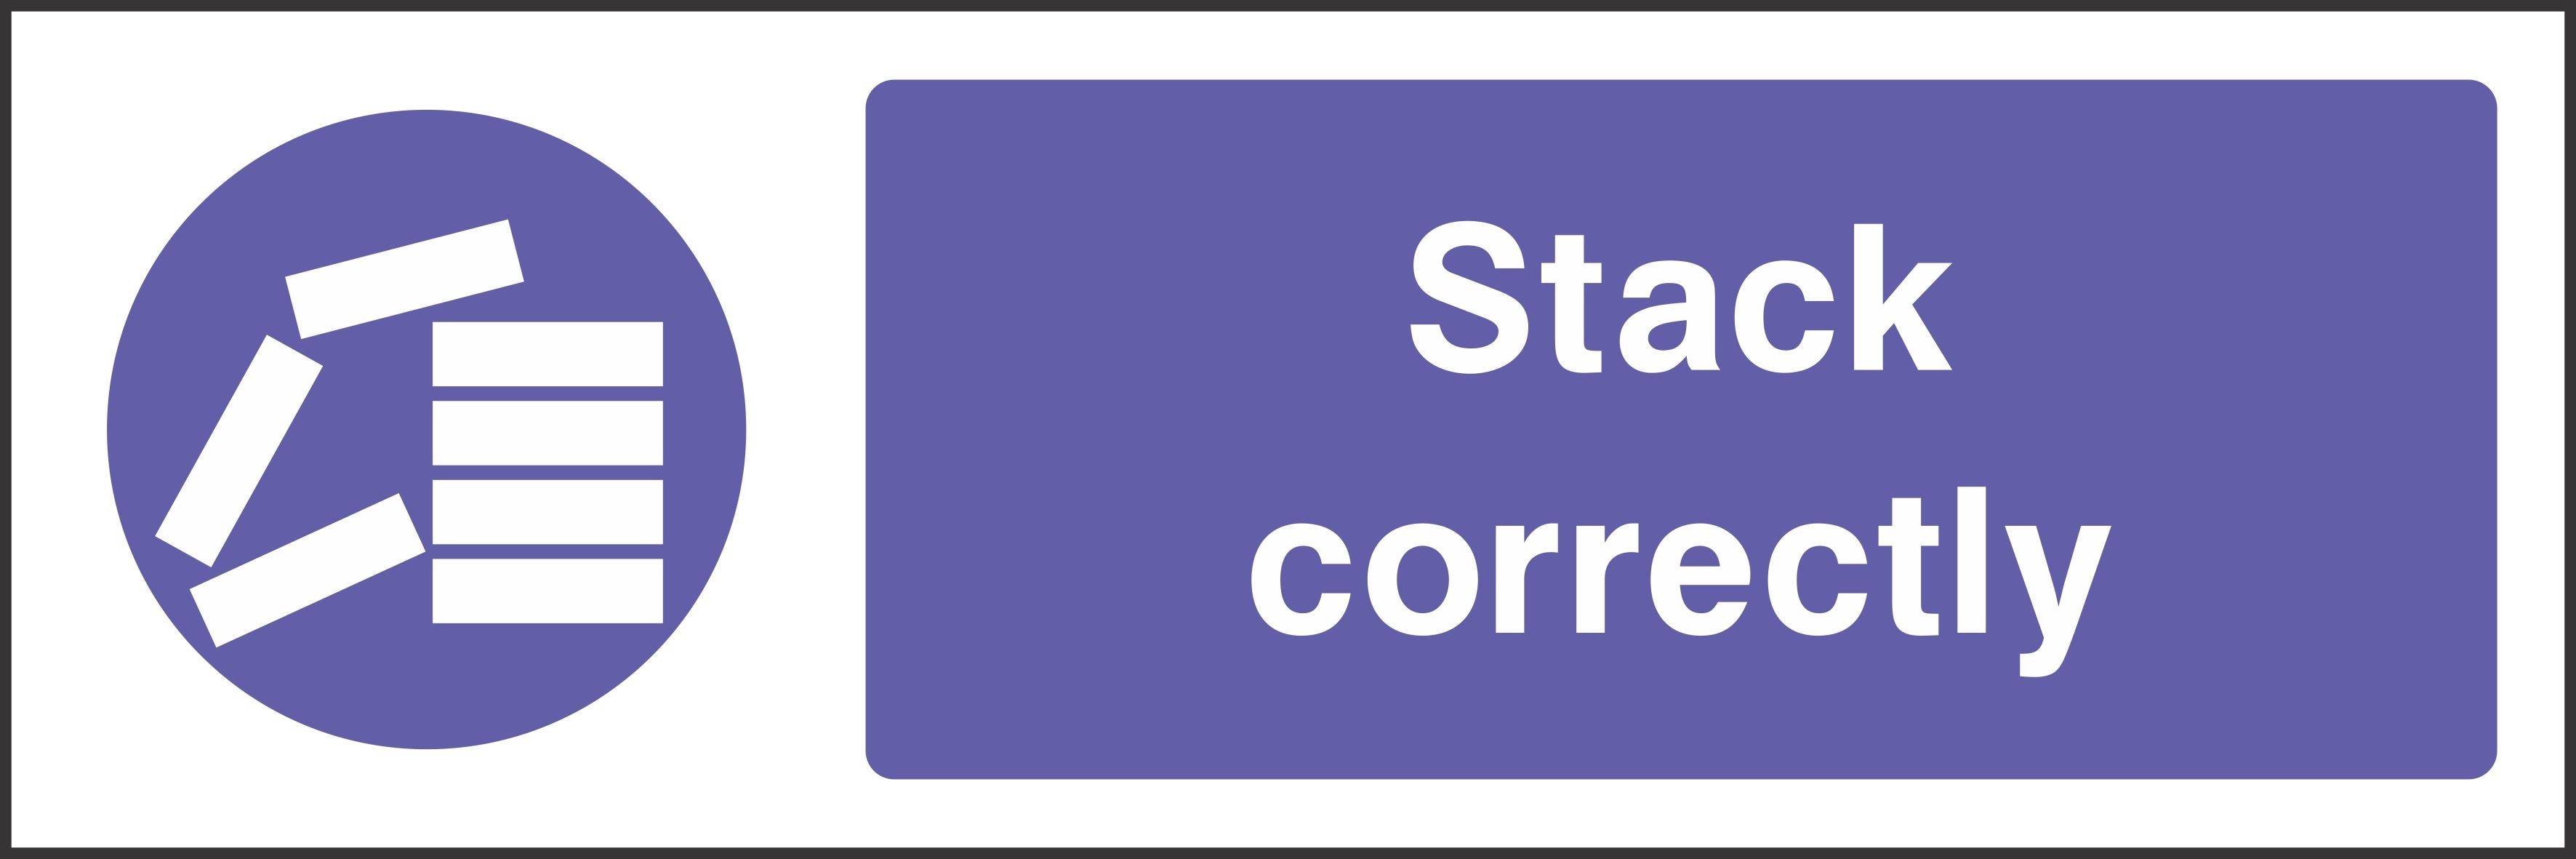 Stack corrctly sign